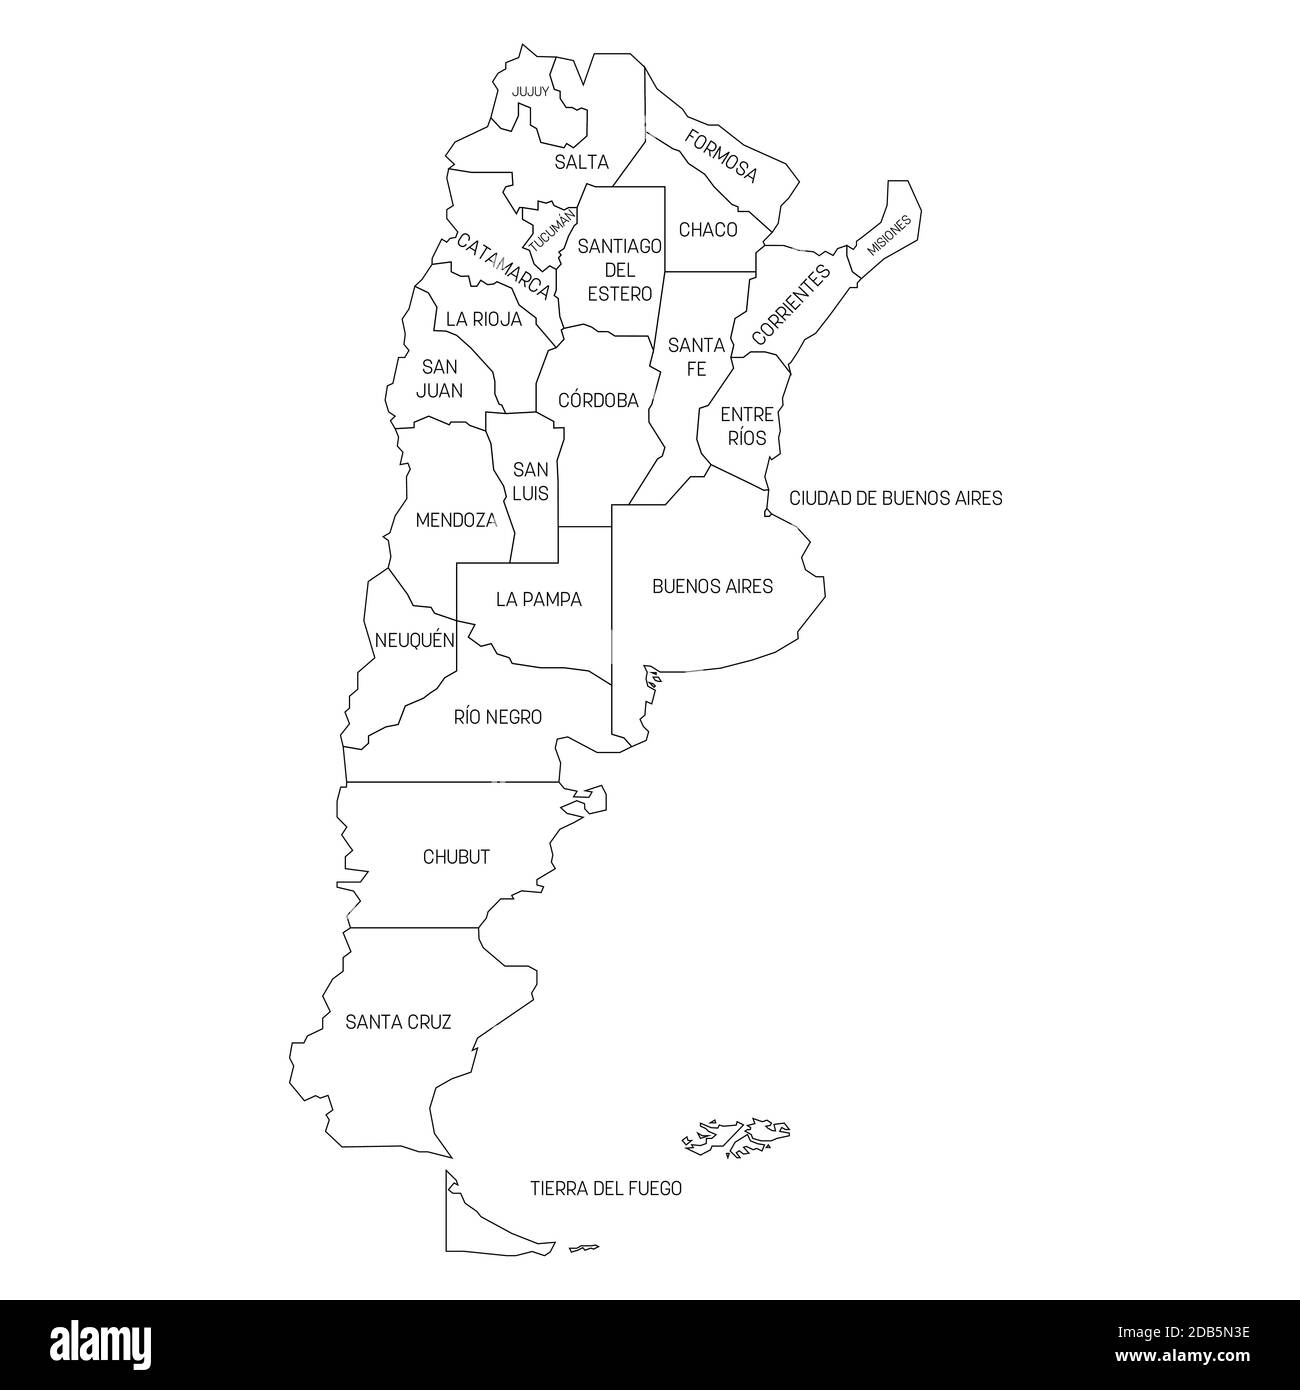 Political map of Argentina. Administrative divisions - provinces. Simple black outline vector map with labels. Stock Vector